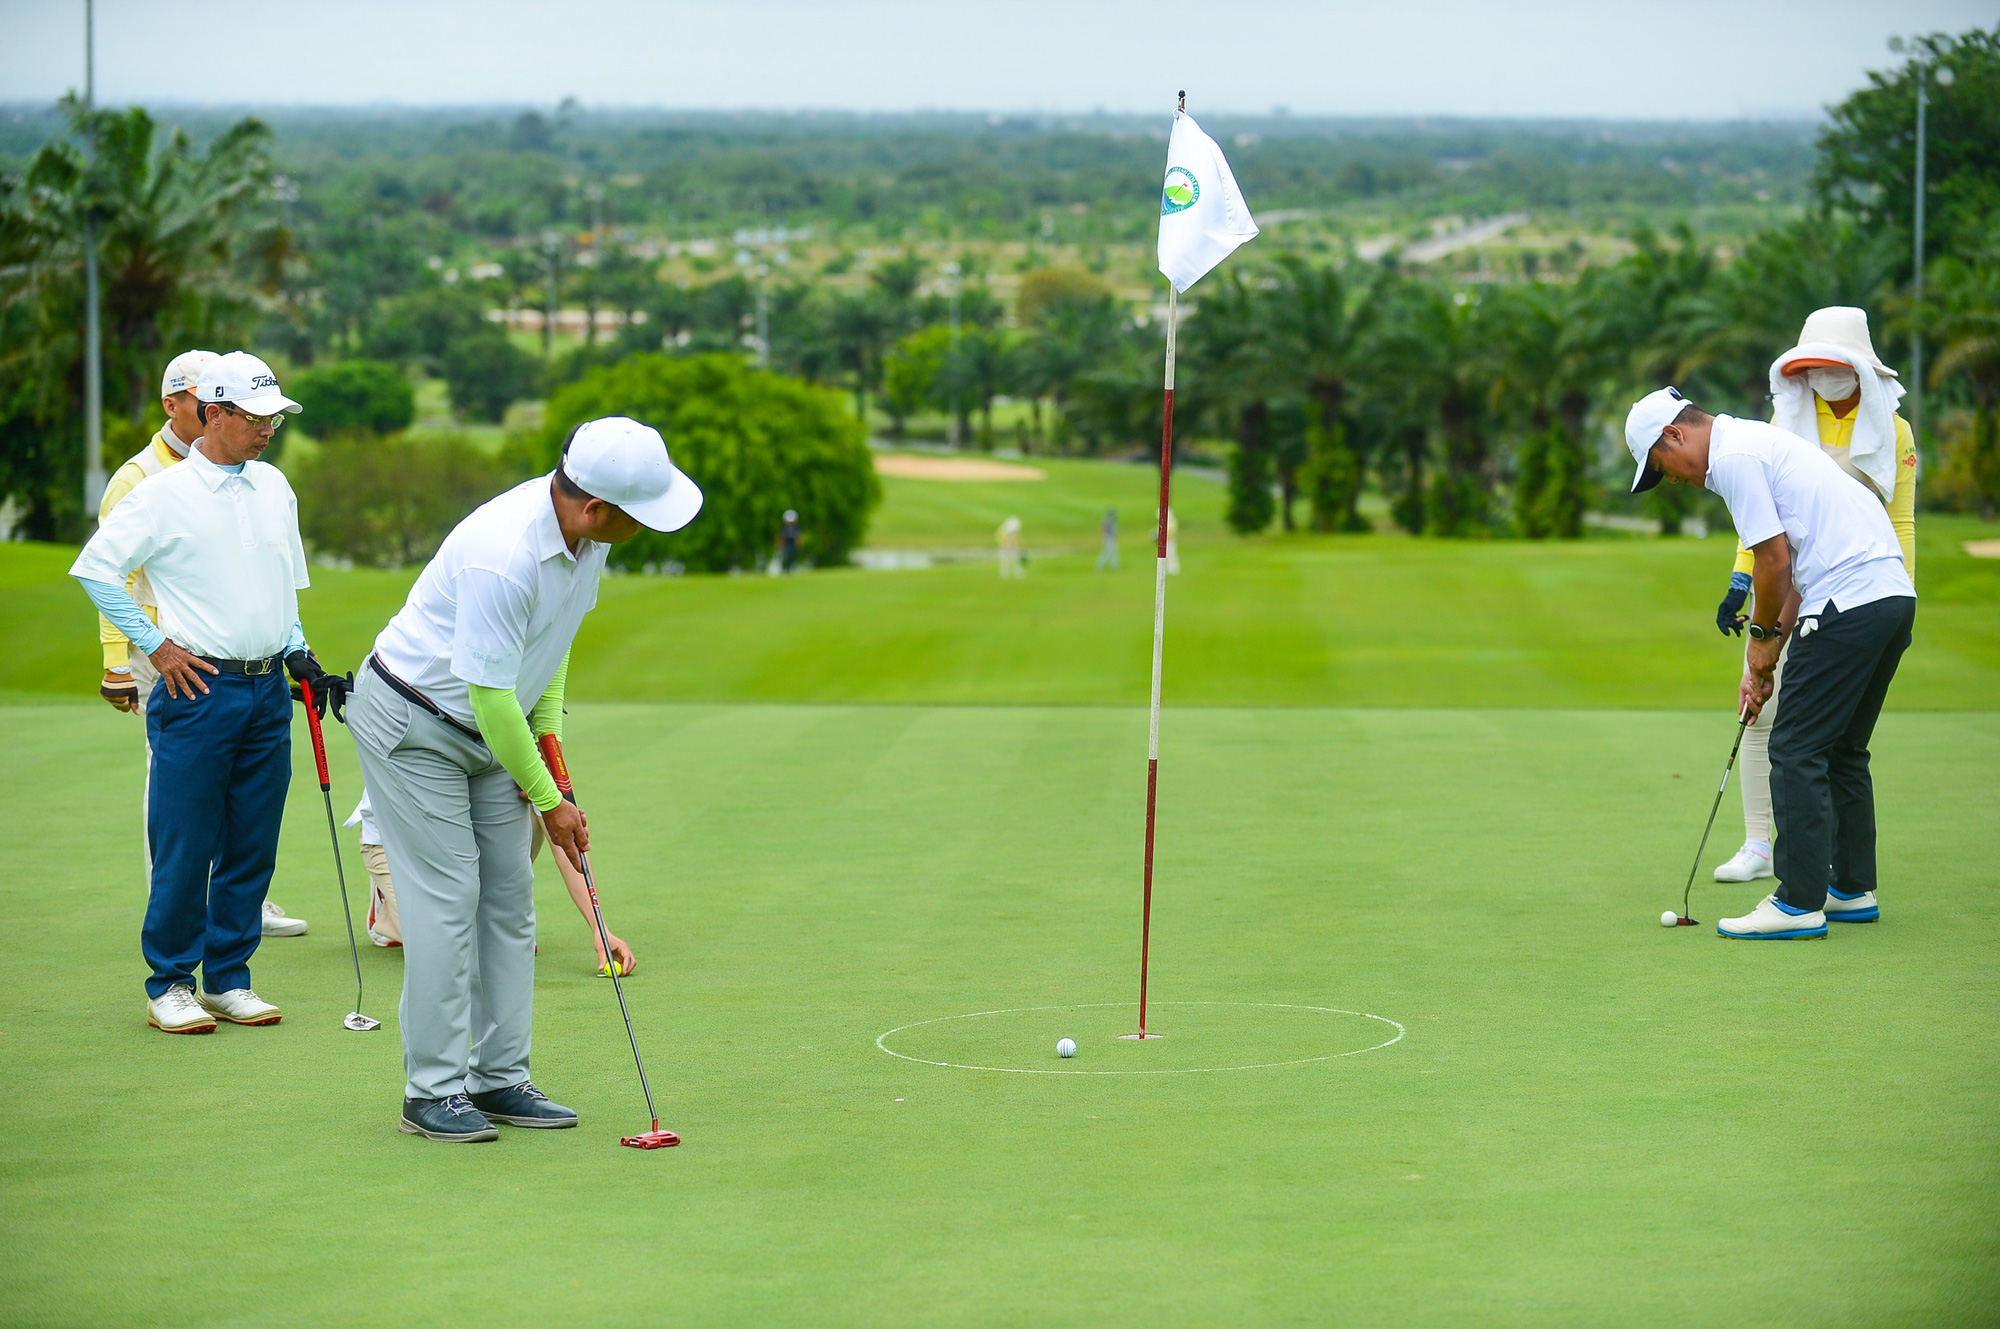 People play golf at a golf course in Vietnam. Photo: Quang Dinh / Tuoi Tre